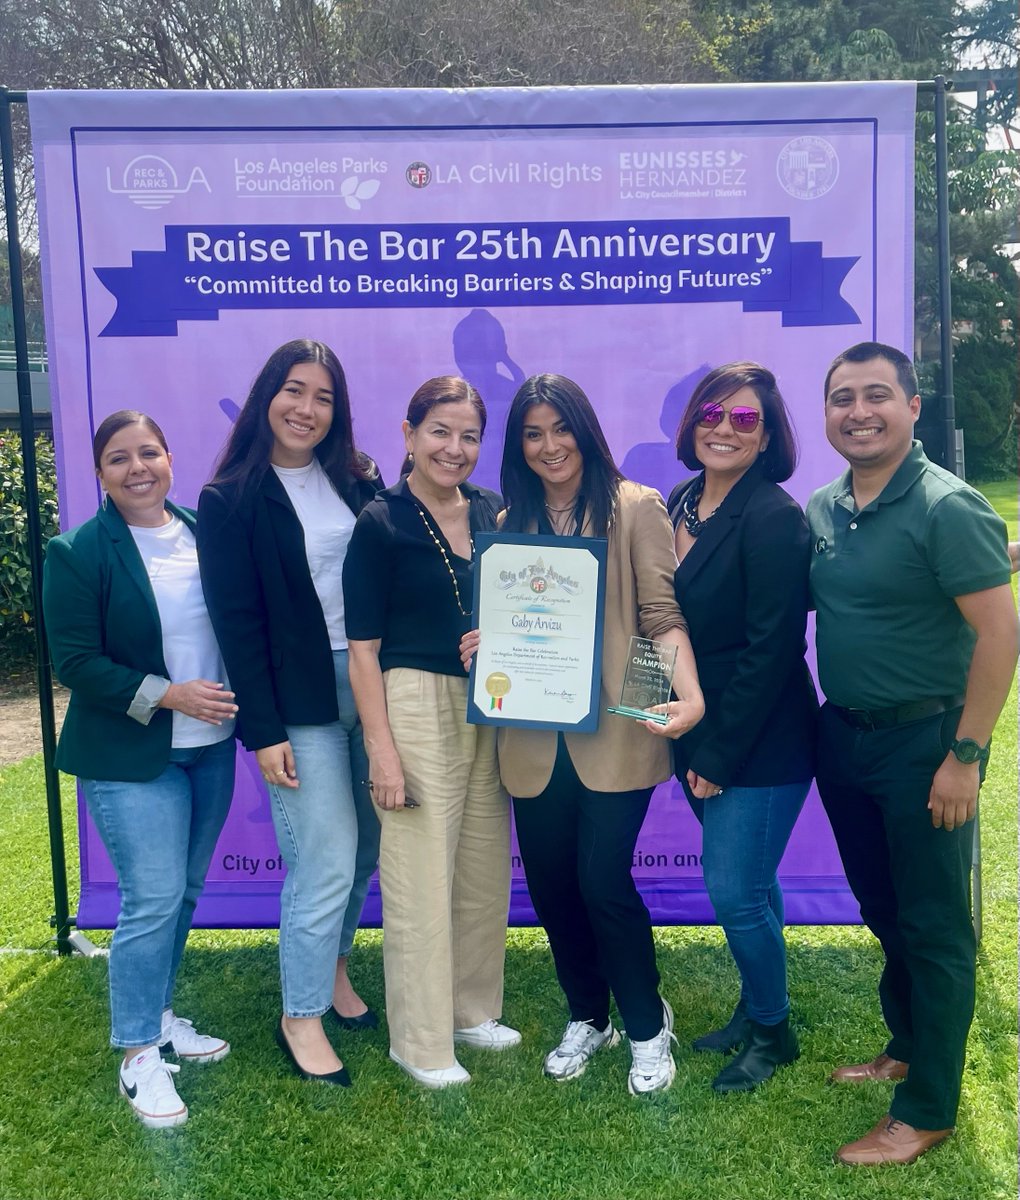 Please join us in celebrating SRLA President & CEO, Gaby Arvizu, who was honored last weekend as a Raise the Bar Equity Champion. Gaby was recognized for her remarkable achievements in fighting for gender equity in sports 🙌